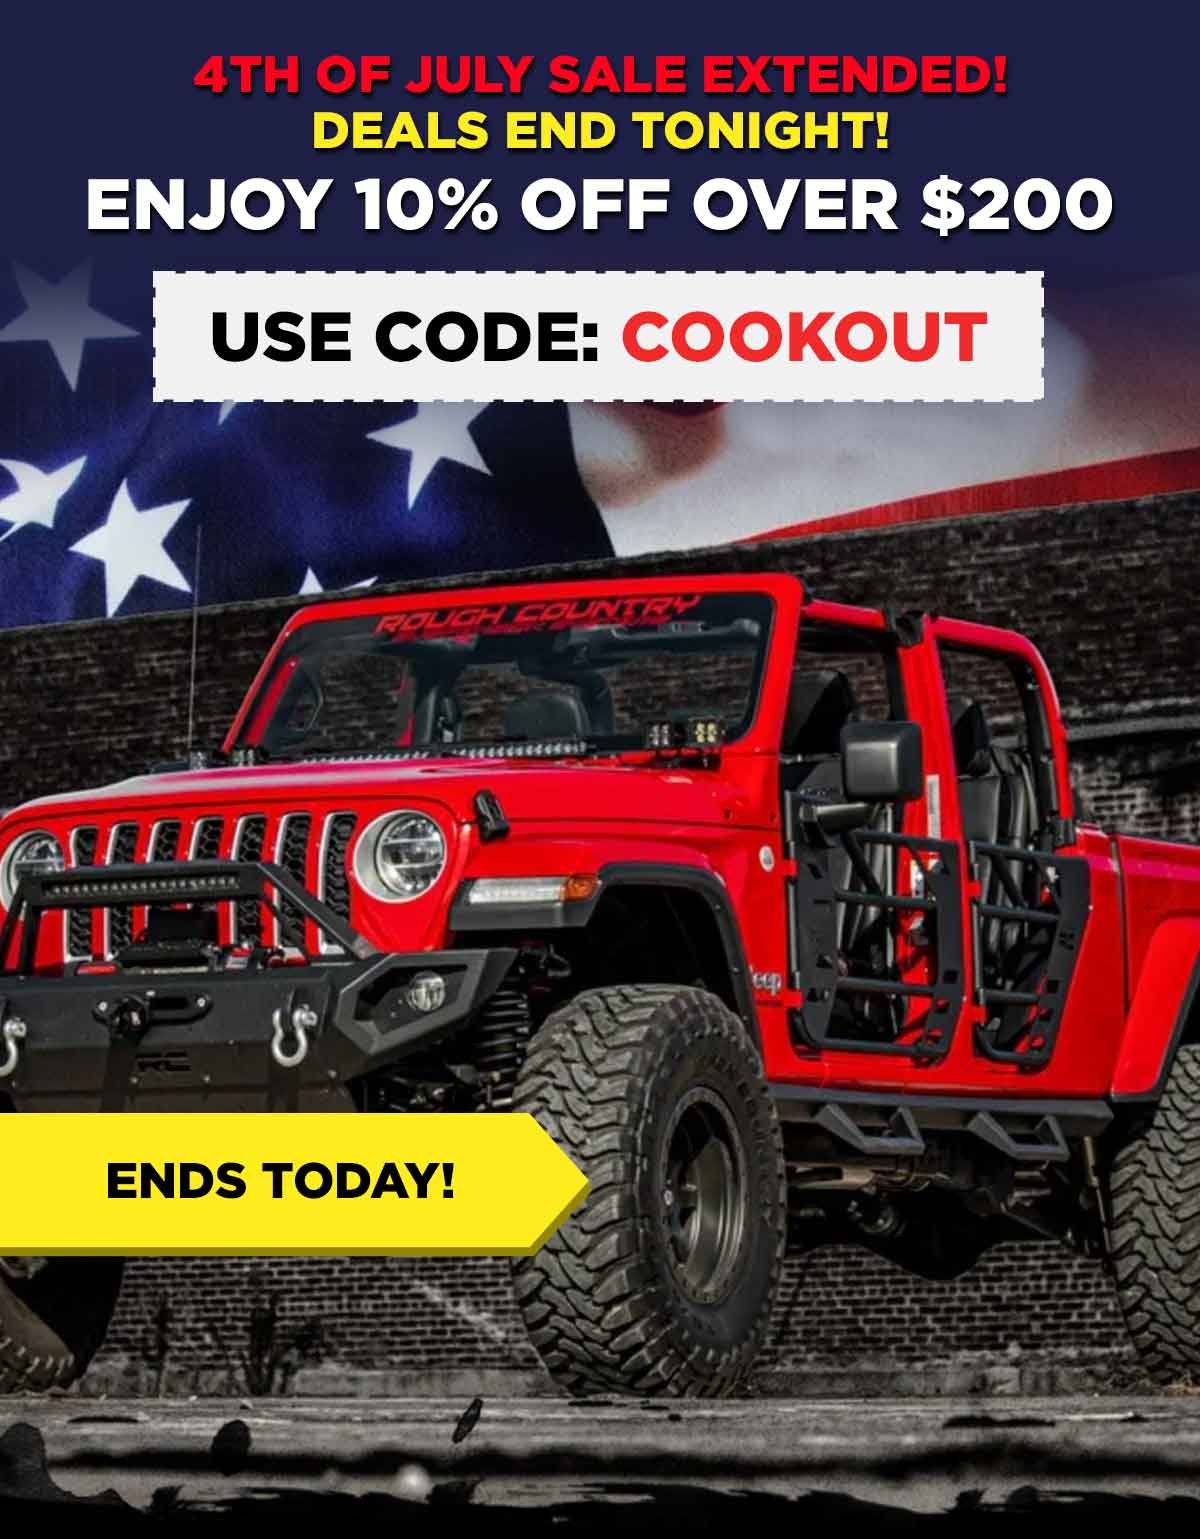 4th of July Sale Extended! Deals End Tonight! Enjoy 10% Off Over $200 Use Code: COOKOUT